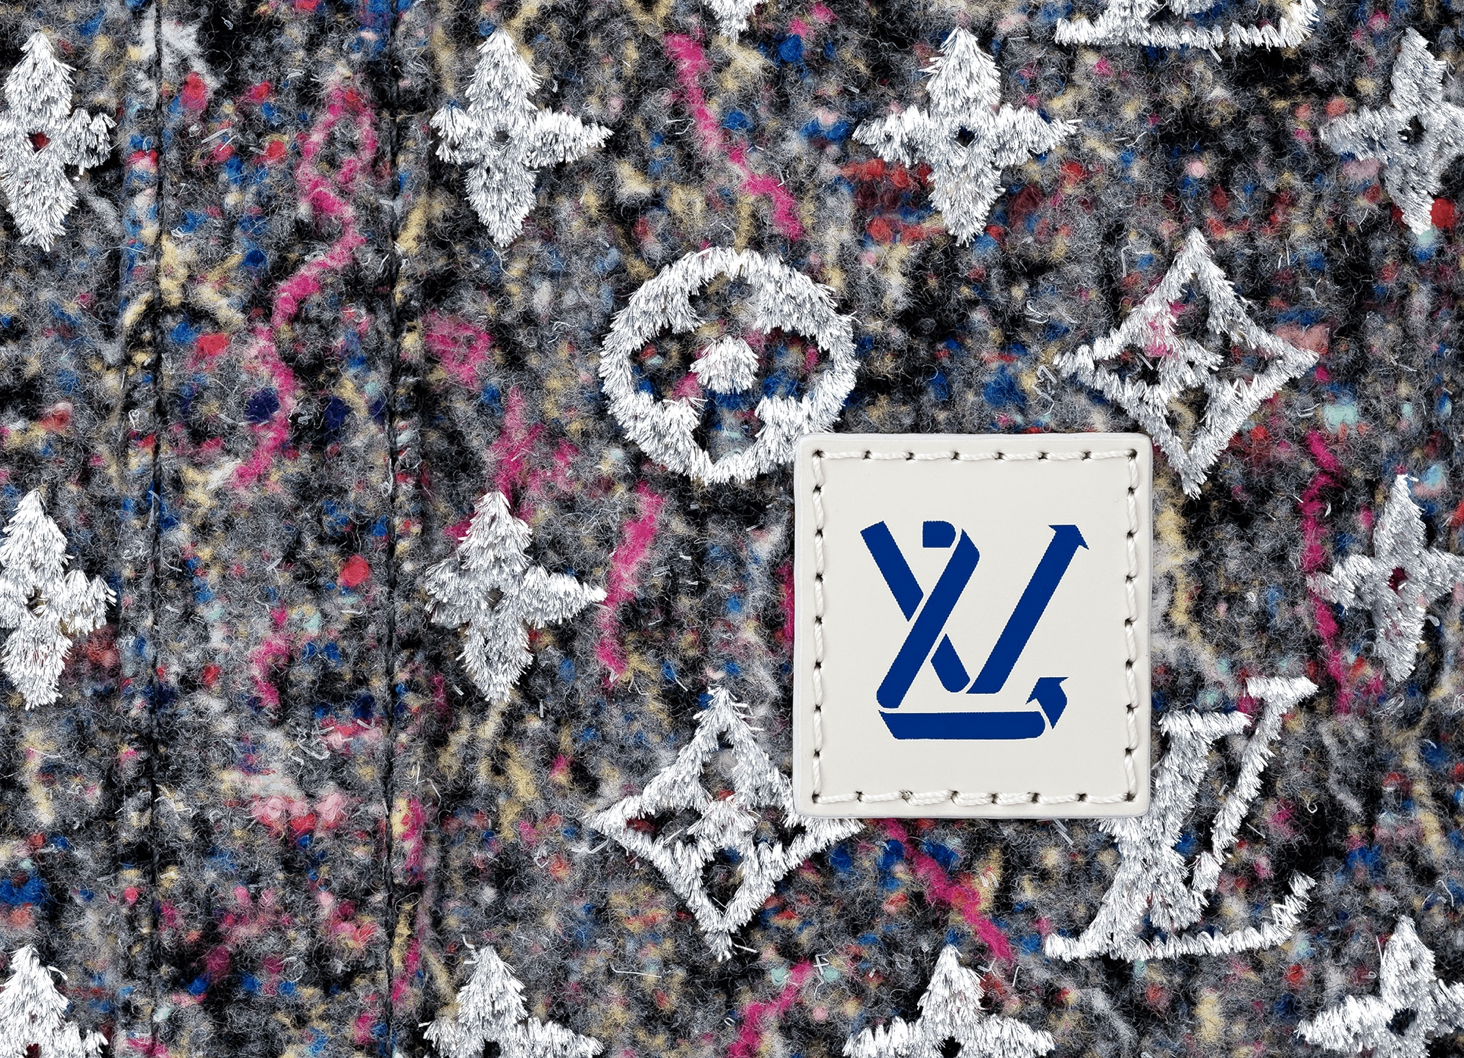 Felt is Louis Vuitton's answer to sustainability